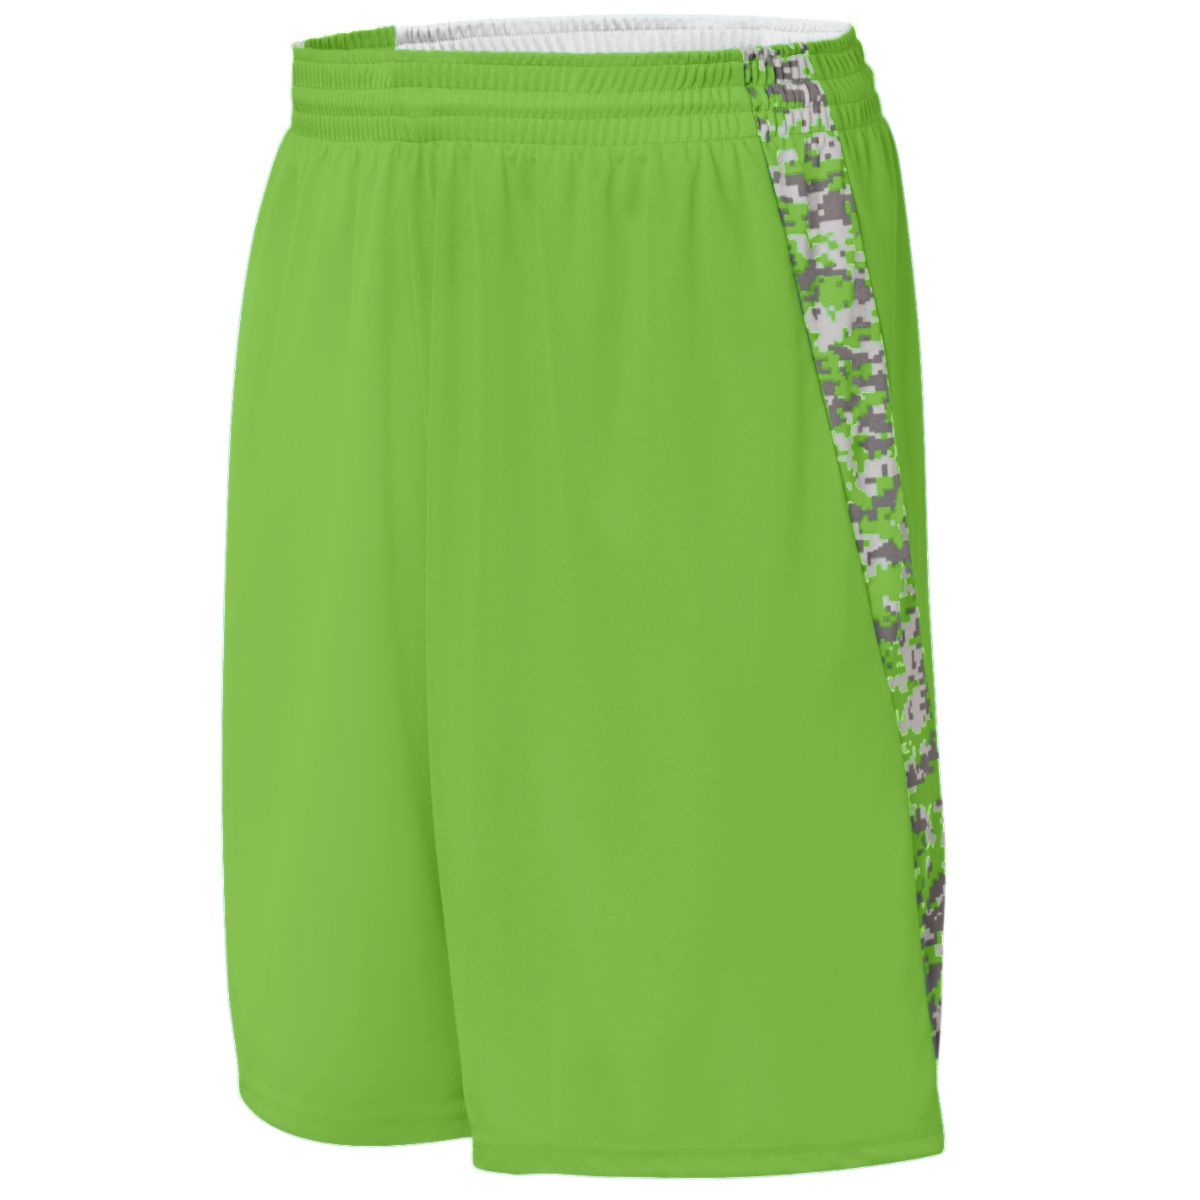 Augusta Sportswear Hook Shot Reversible Shorts in Lime/Lime Digi  -Part of the Adult, Adult-Shorts, Augusta-Products, Basketball, All-Sports, All-Sports-1 product lines at KanaleyCreations.com